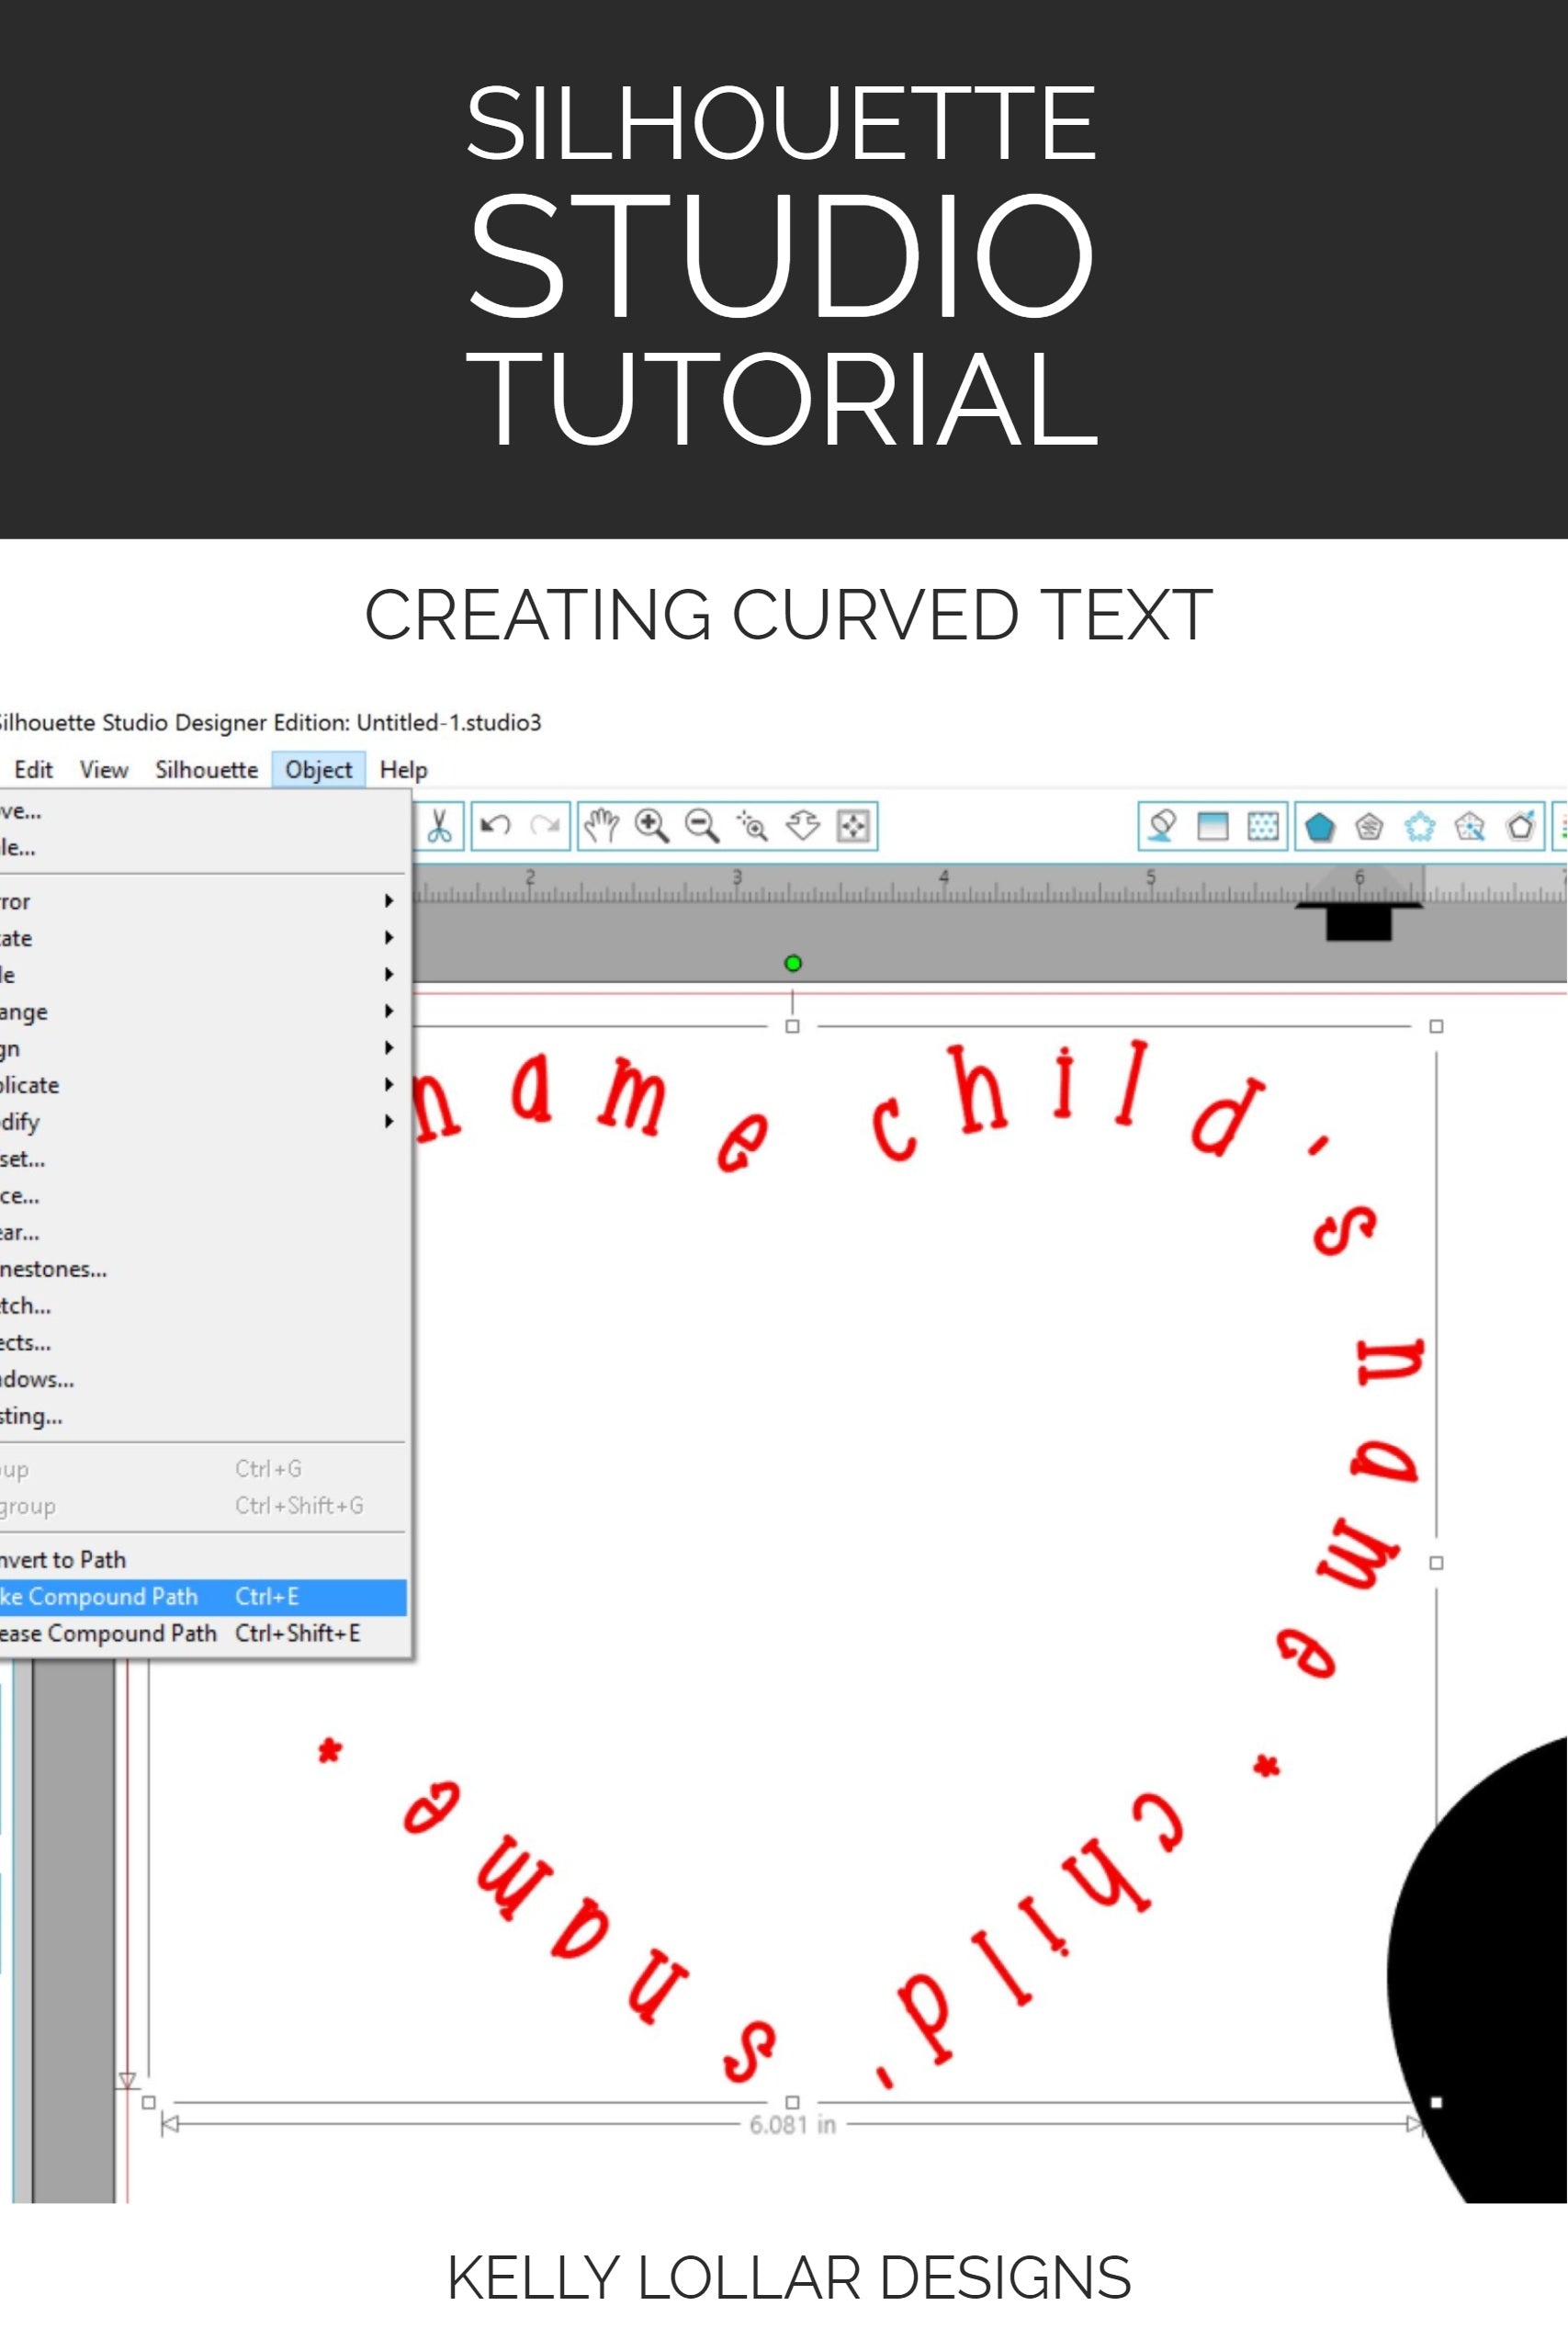 Silhouette Studio Tutorial - Placing Text on a Curved Path | Kelly Lollar Designs